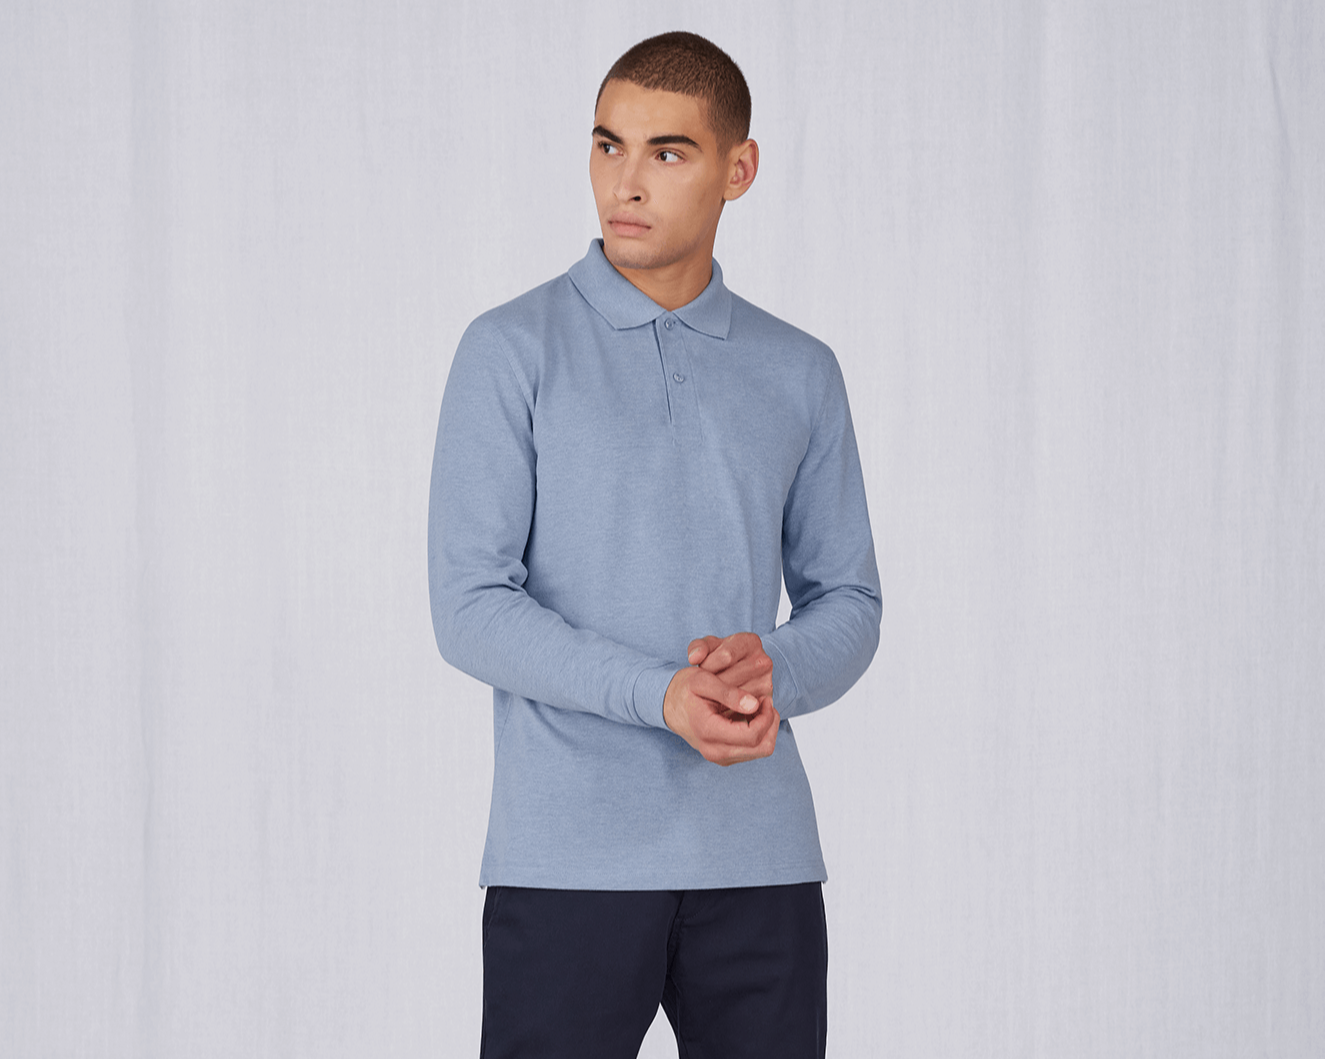 Selected Homme oversized t-shirt in heavy organic cotton light blue